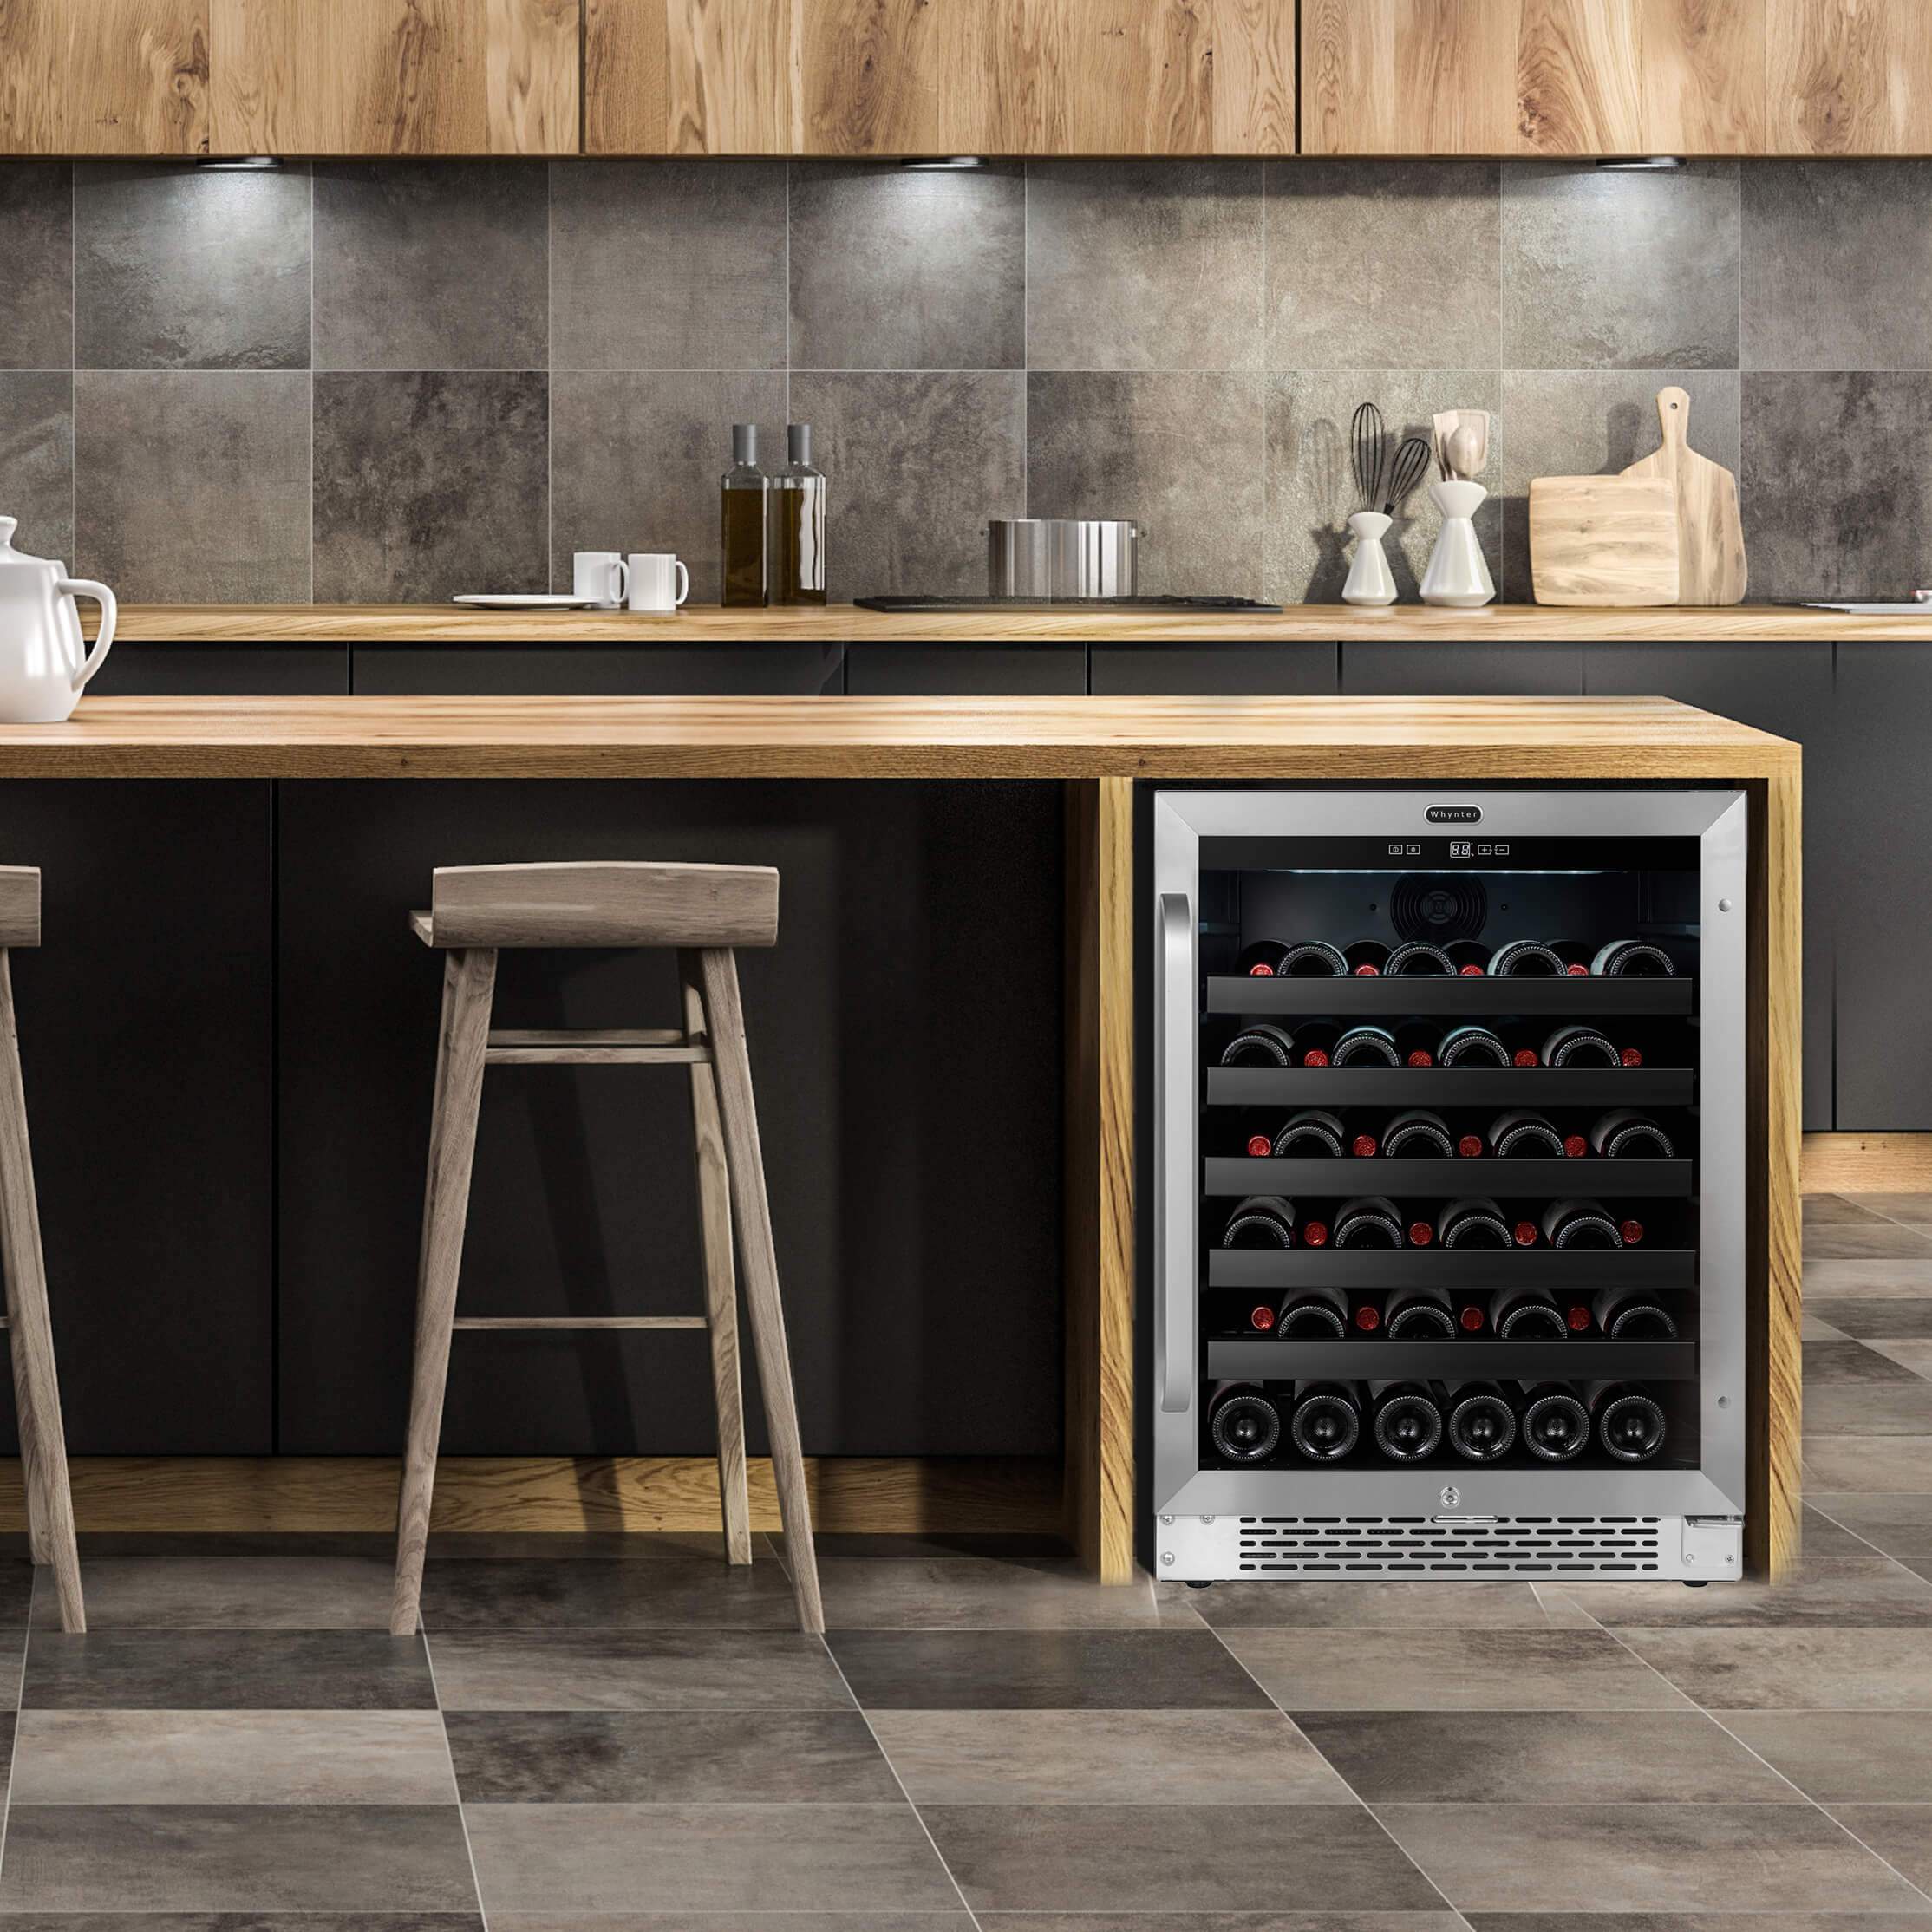 Whynter 24 inch Built-In 46 Bottle Undercounter Stainless Steel Wine Refrigerator with Reversible Door, Digital Control, Lock and Carbon Filter BWR-408SB Wine Coolers Empire